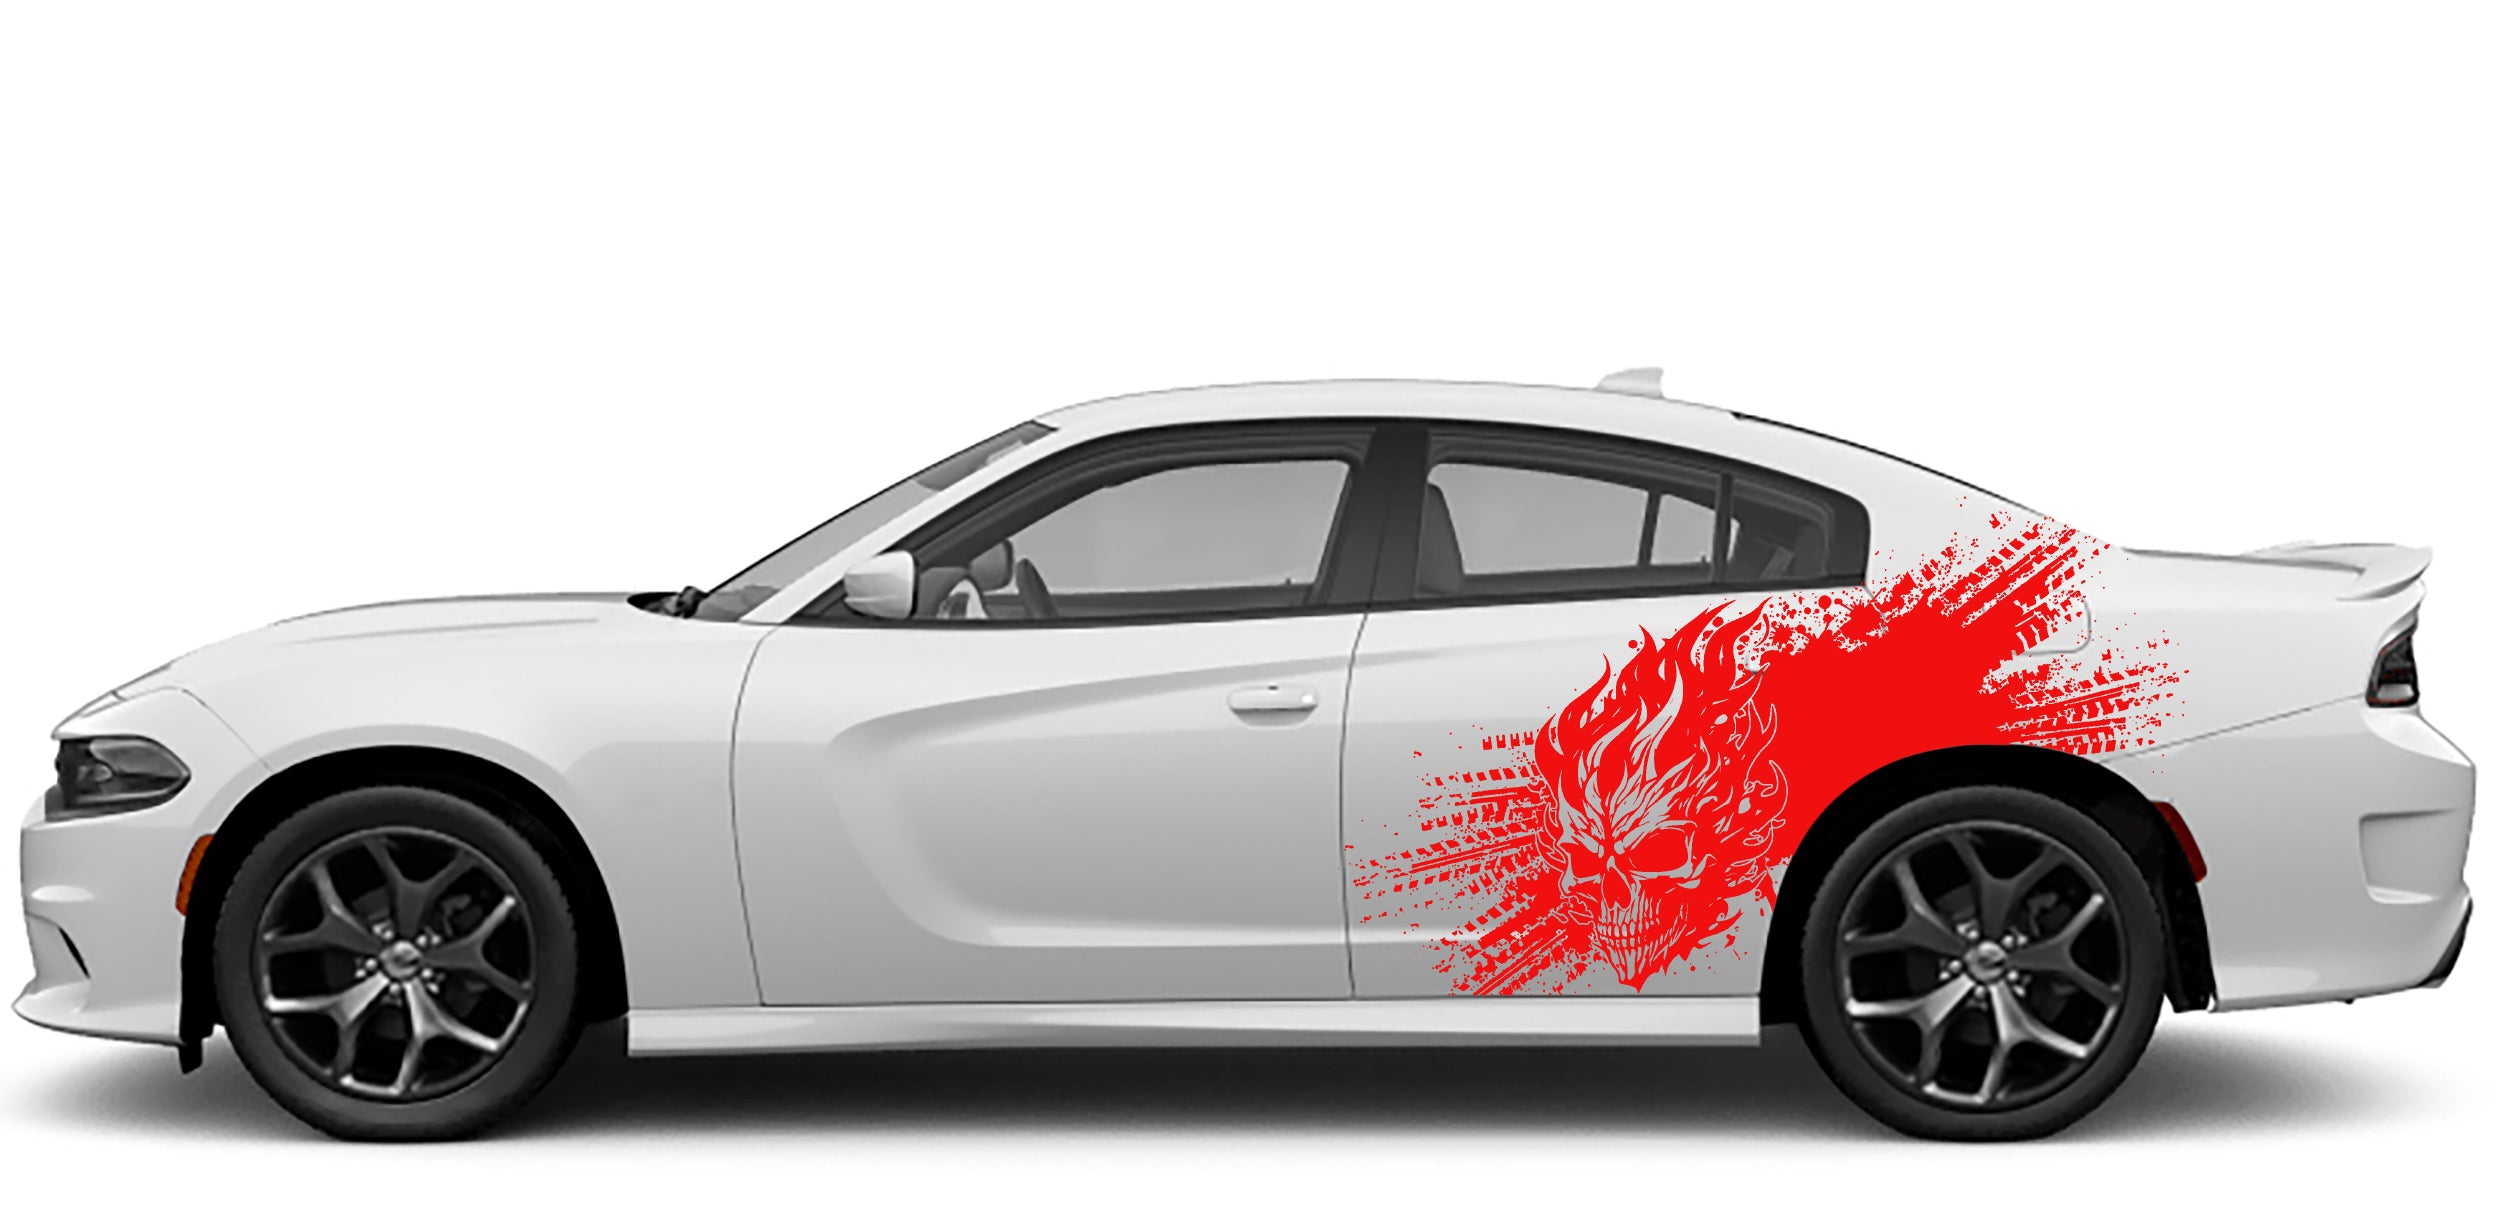 flaming skull side graphics for dodge charger 2015 to 2023 models red